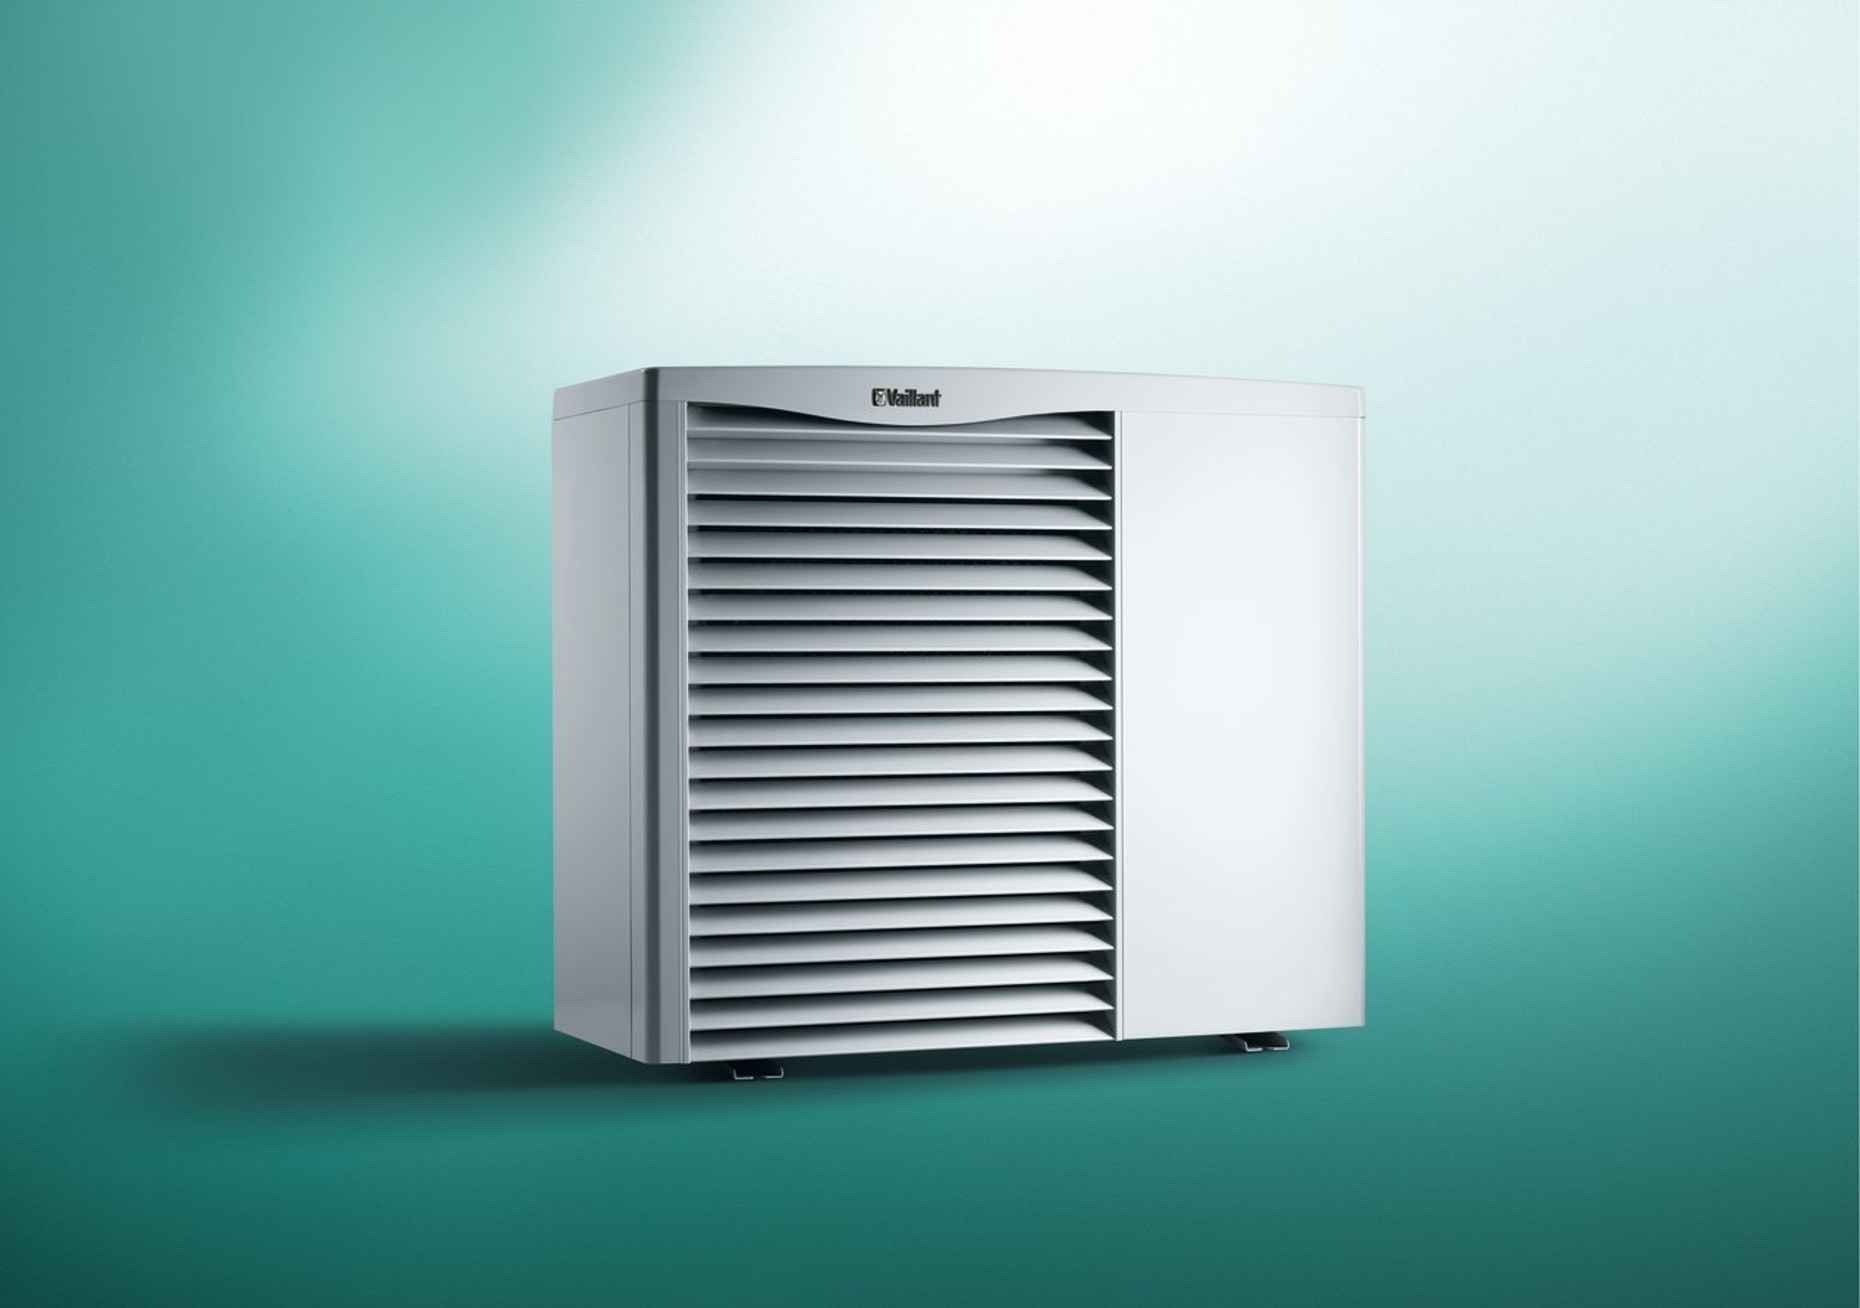 The Most Efficient Way to Use an Air Water Heat Pump